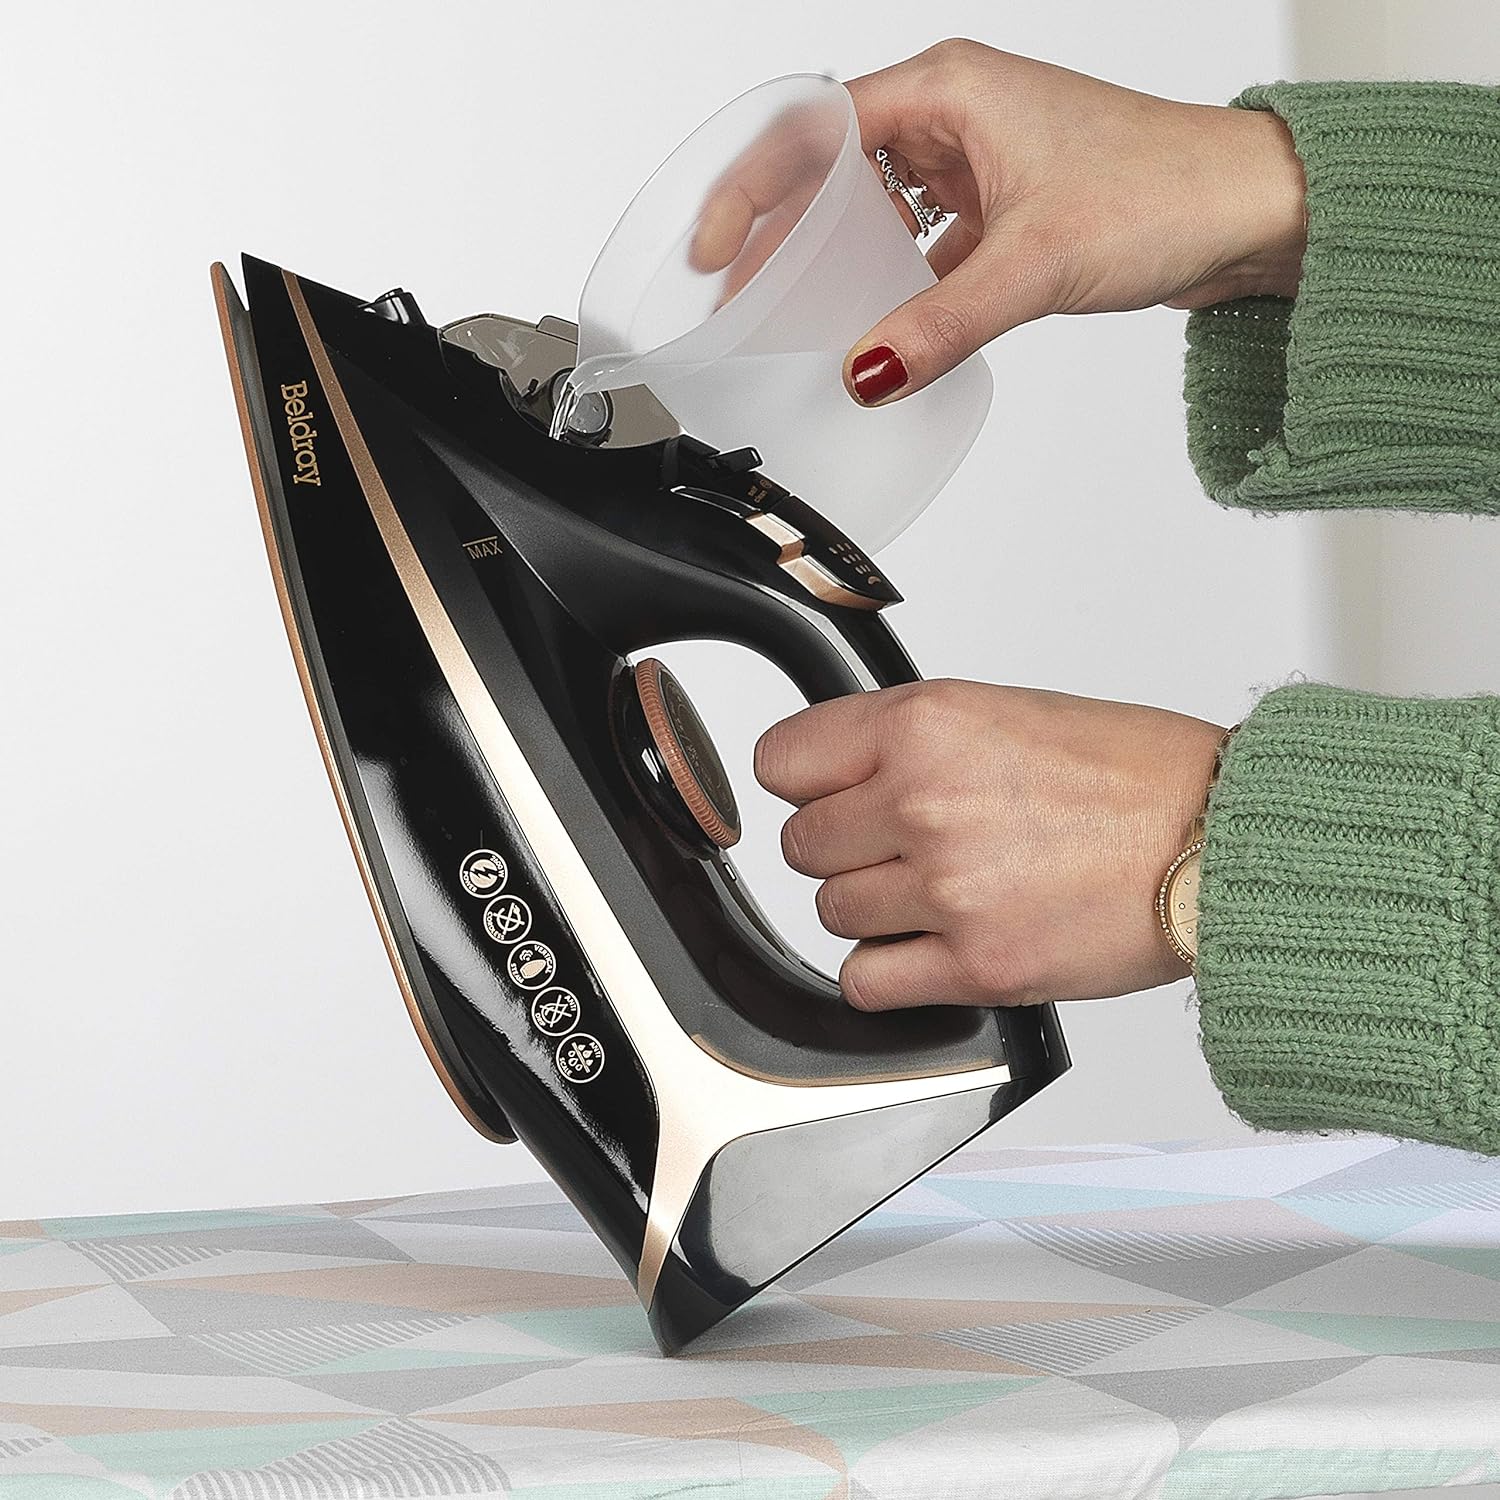 Beldray BEL0987RG 2 In 1 Cordless Steam Iron - 300ml, Rose Gold Edition, 360° Charging Base, Smooth Ceramic Soleplate, Corded or Cordless, 2600 W, 140g/min Steam Shot, Anti-Drip & Anti-Calc Functions